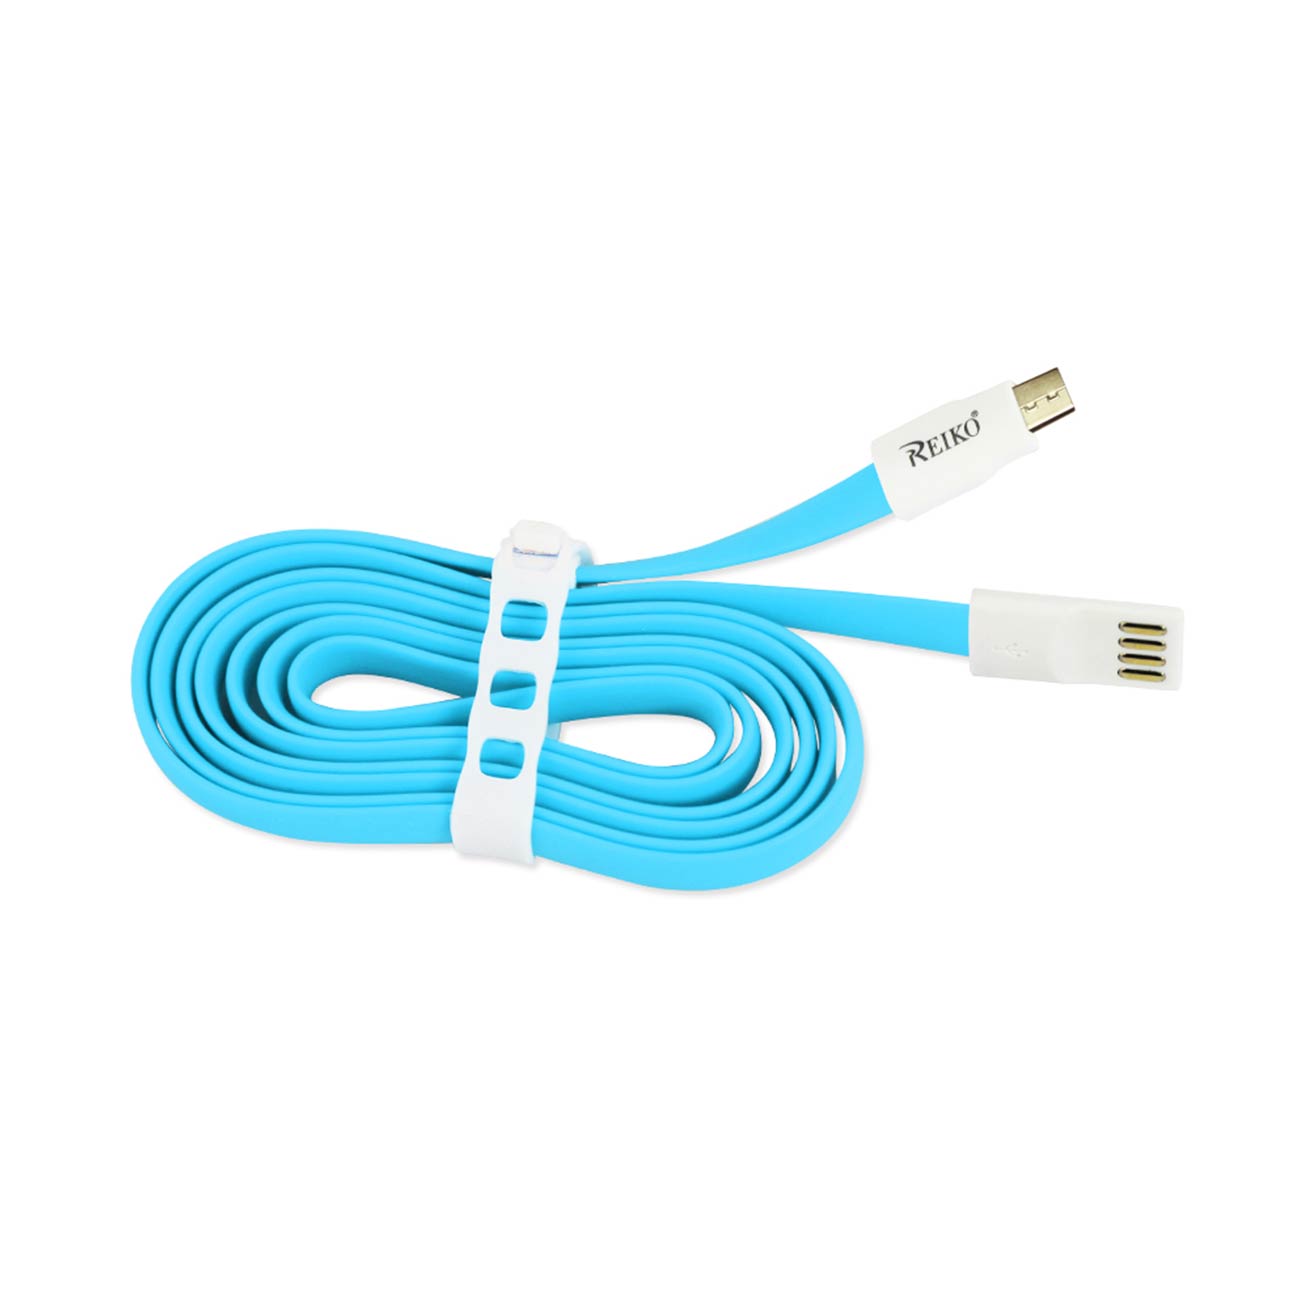 Data Cable USB Flat Micro Gold Plated 3.9Ft With Cable Tie Blue color